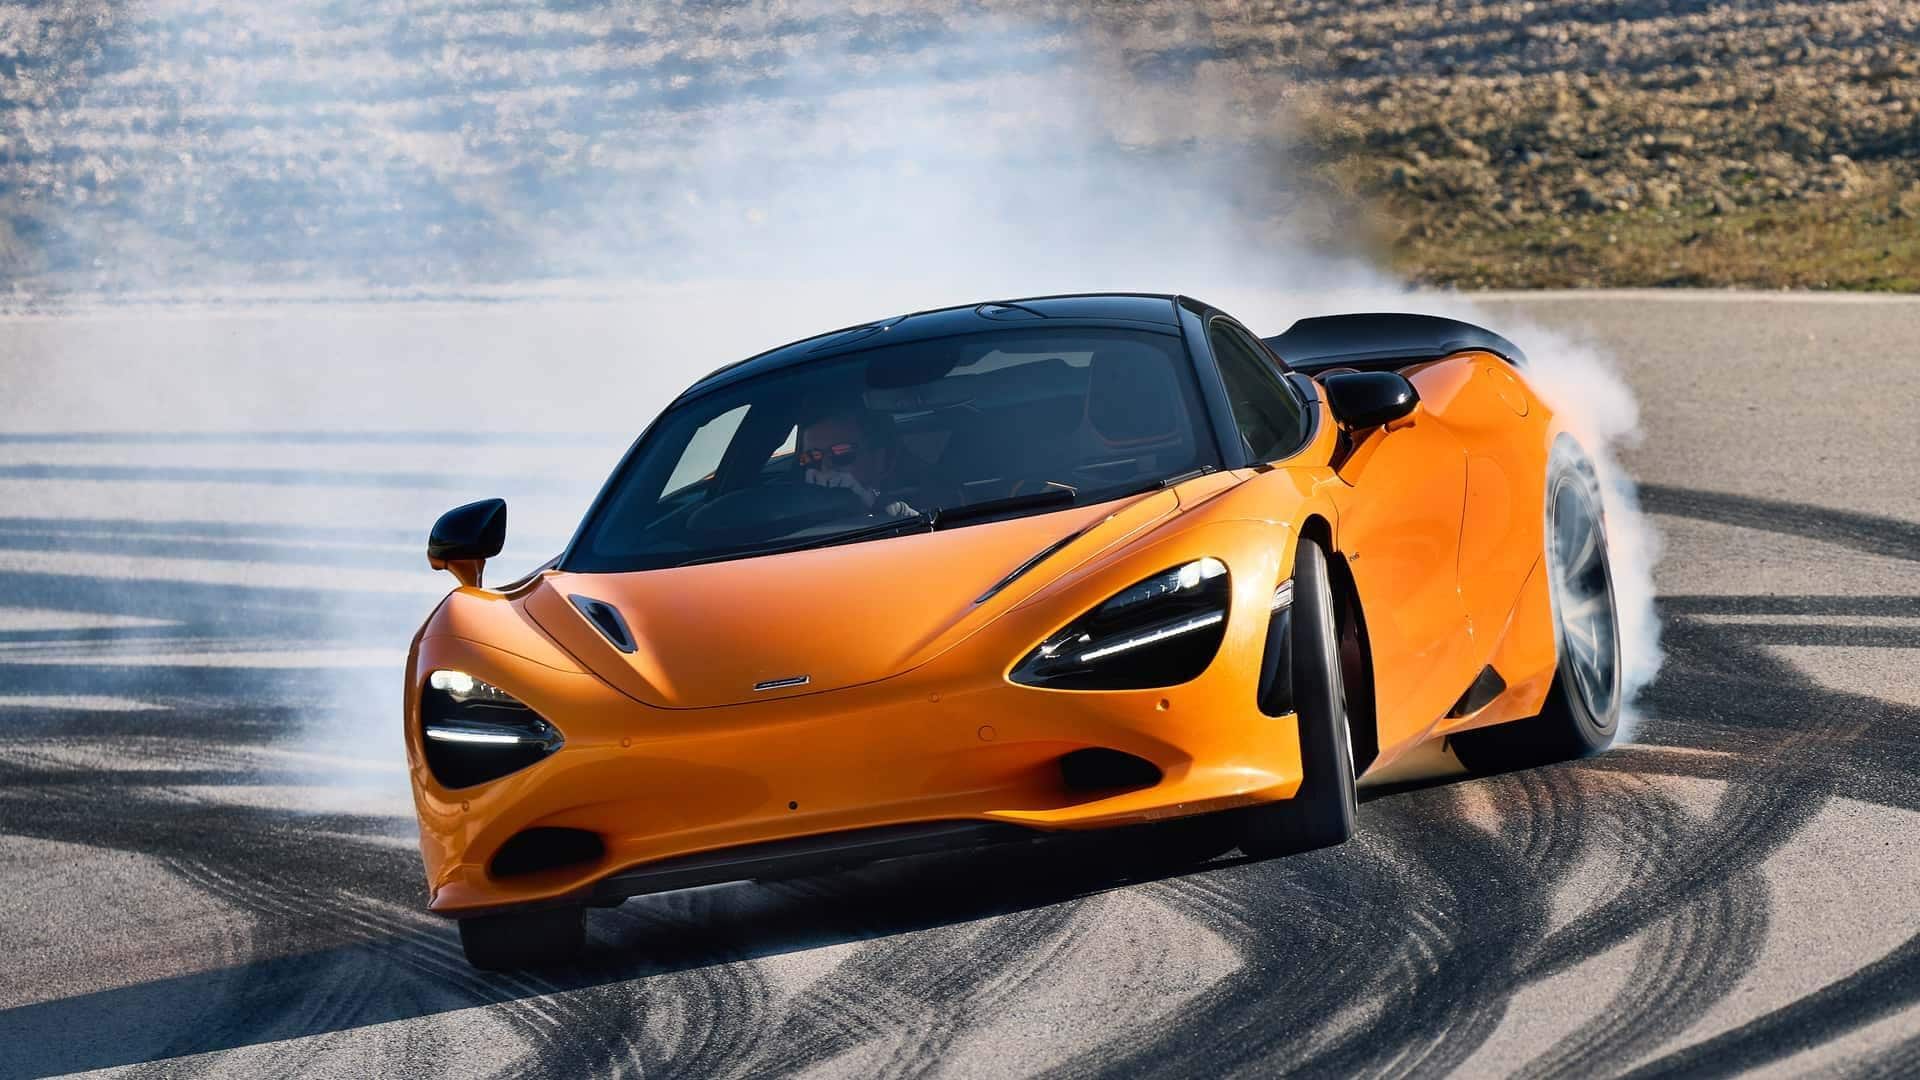 McLaren 750S launched in India at Rs. 5.9 crore